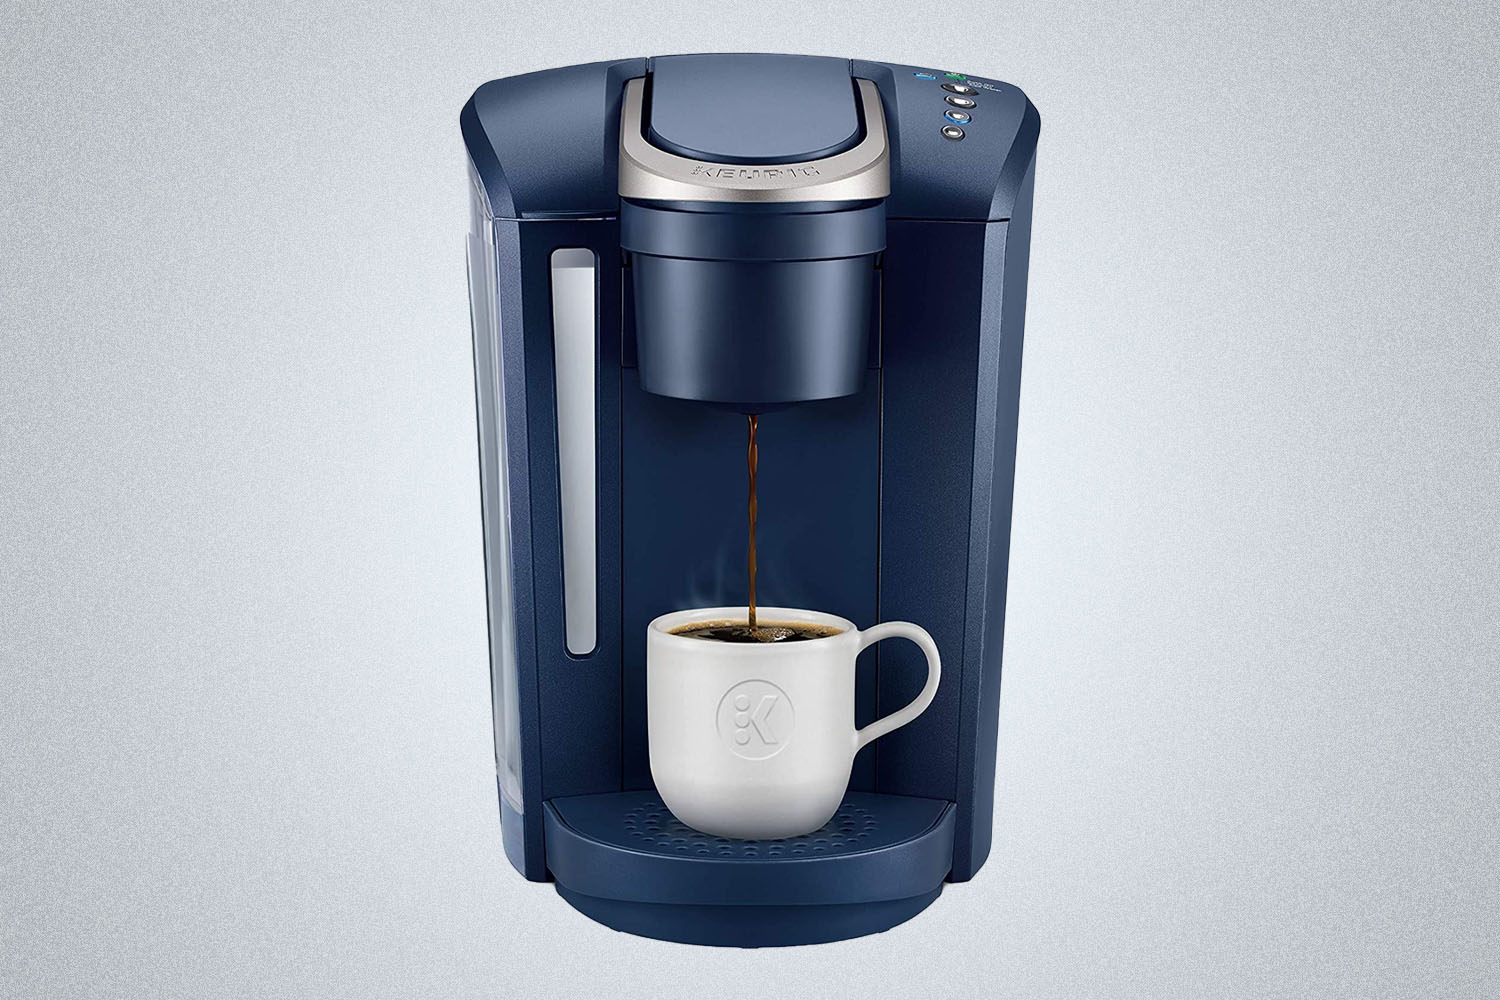 a coffee maker during into a cup